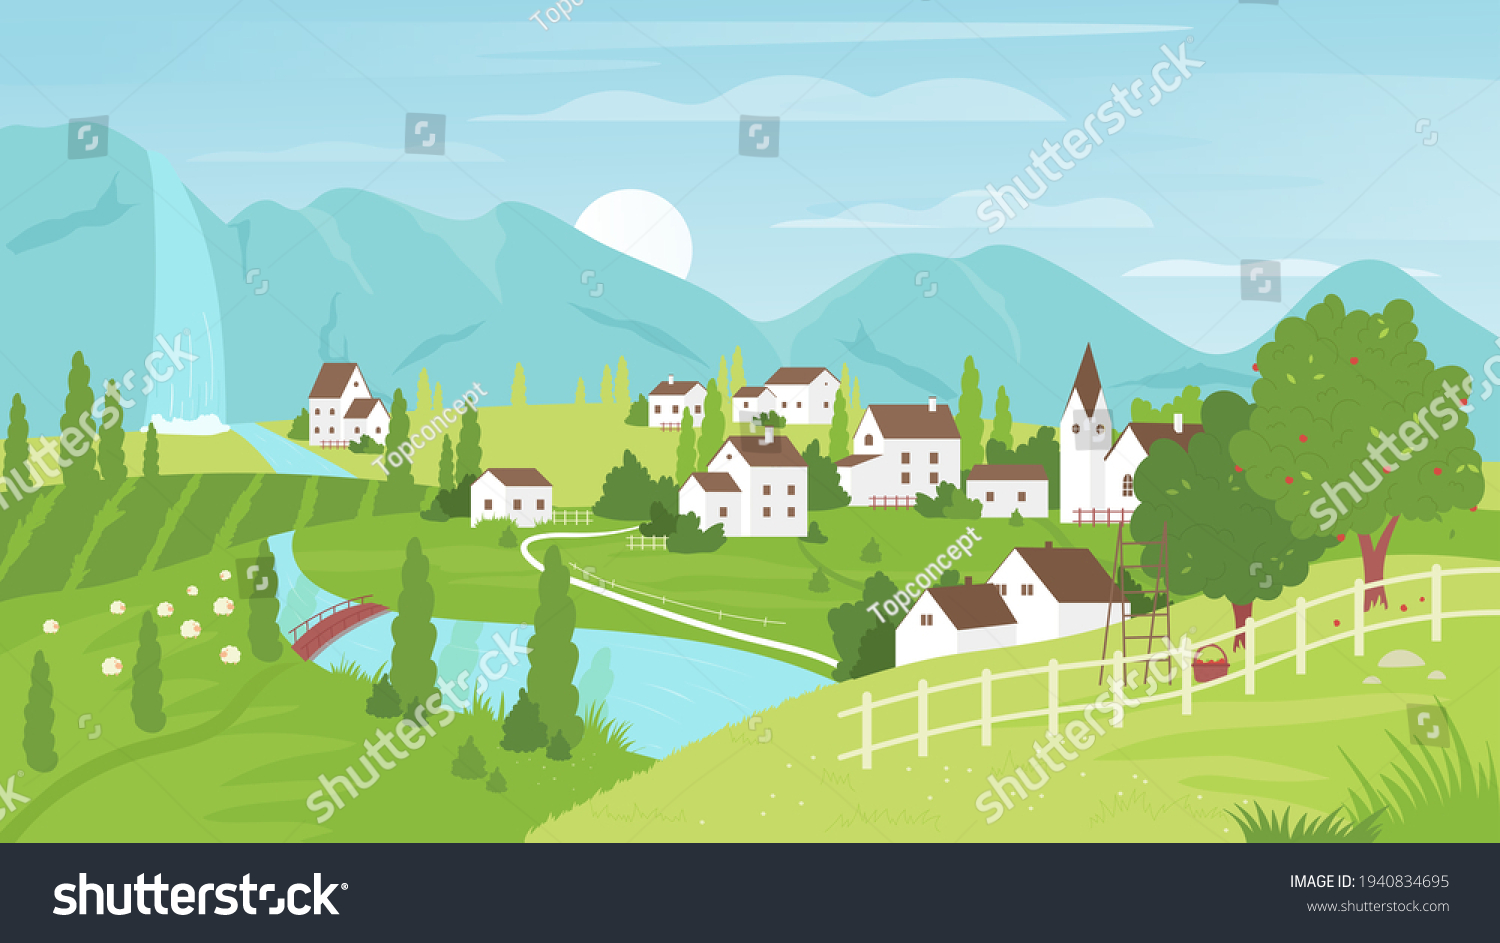 Rural mountain landscape and village vector illustration. Cartoon summer green farm land field with grazing sheep, apple garden, waterfall and river, road to farmer houses summertime background #1940834695